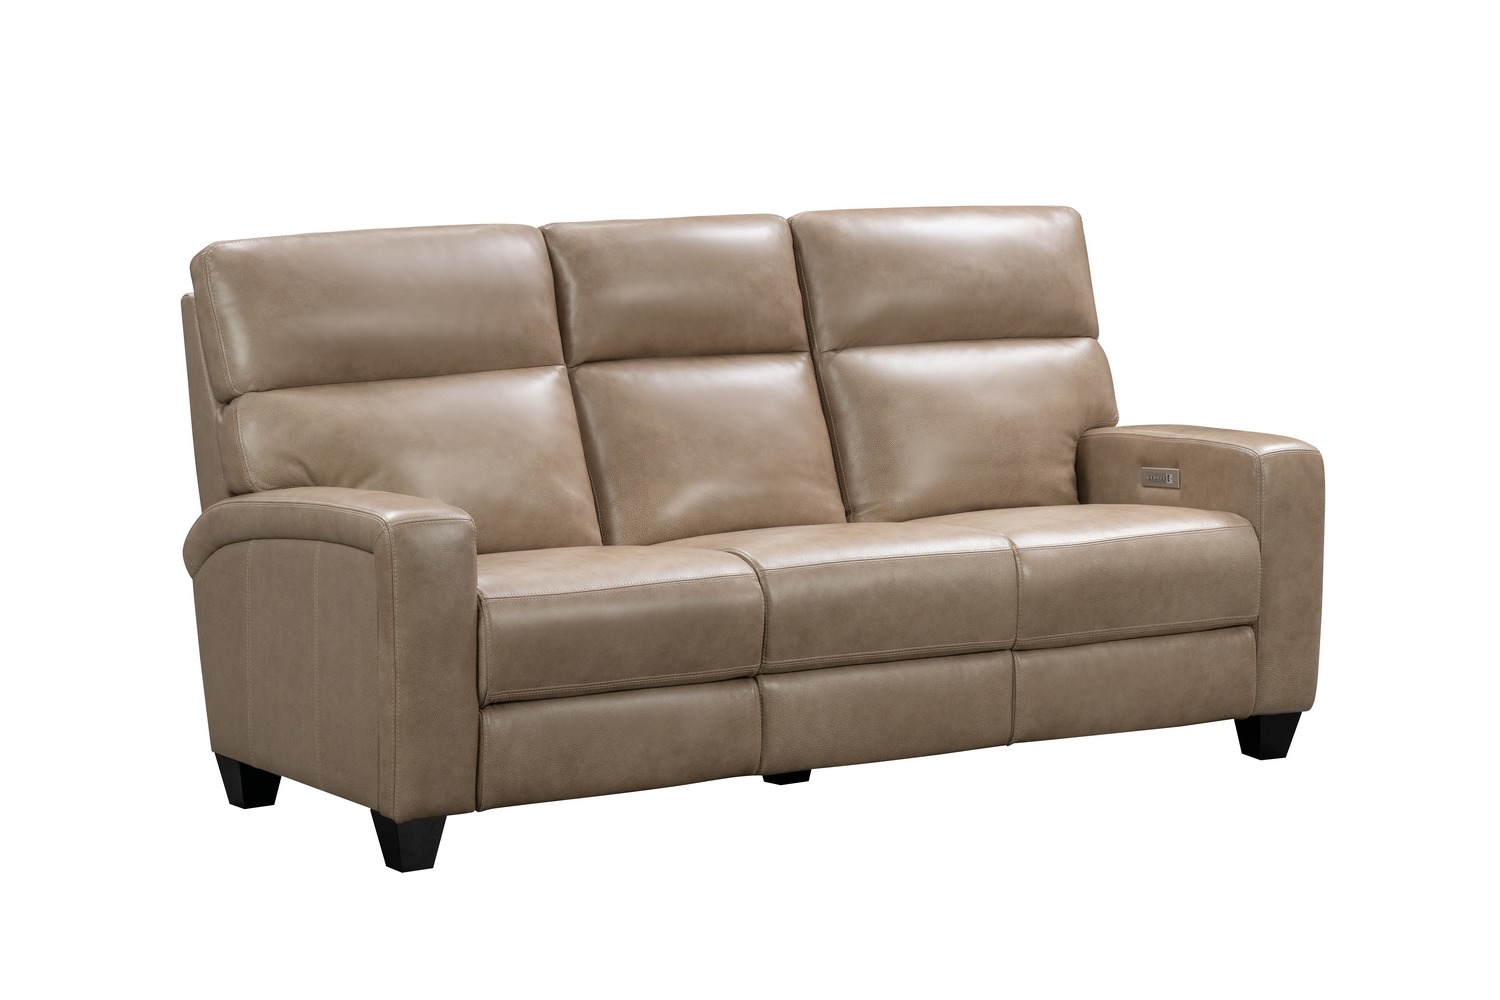 Barcalounger Marcello Power Reclining Sofa with Power Head Rests and Power Lumbar - Elliot Taupe/Leather Match